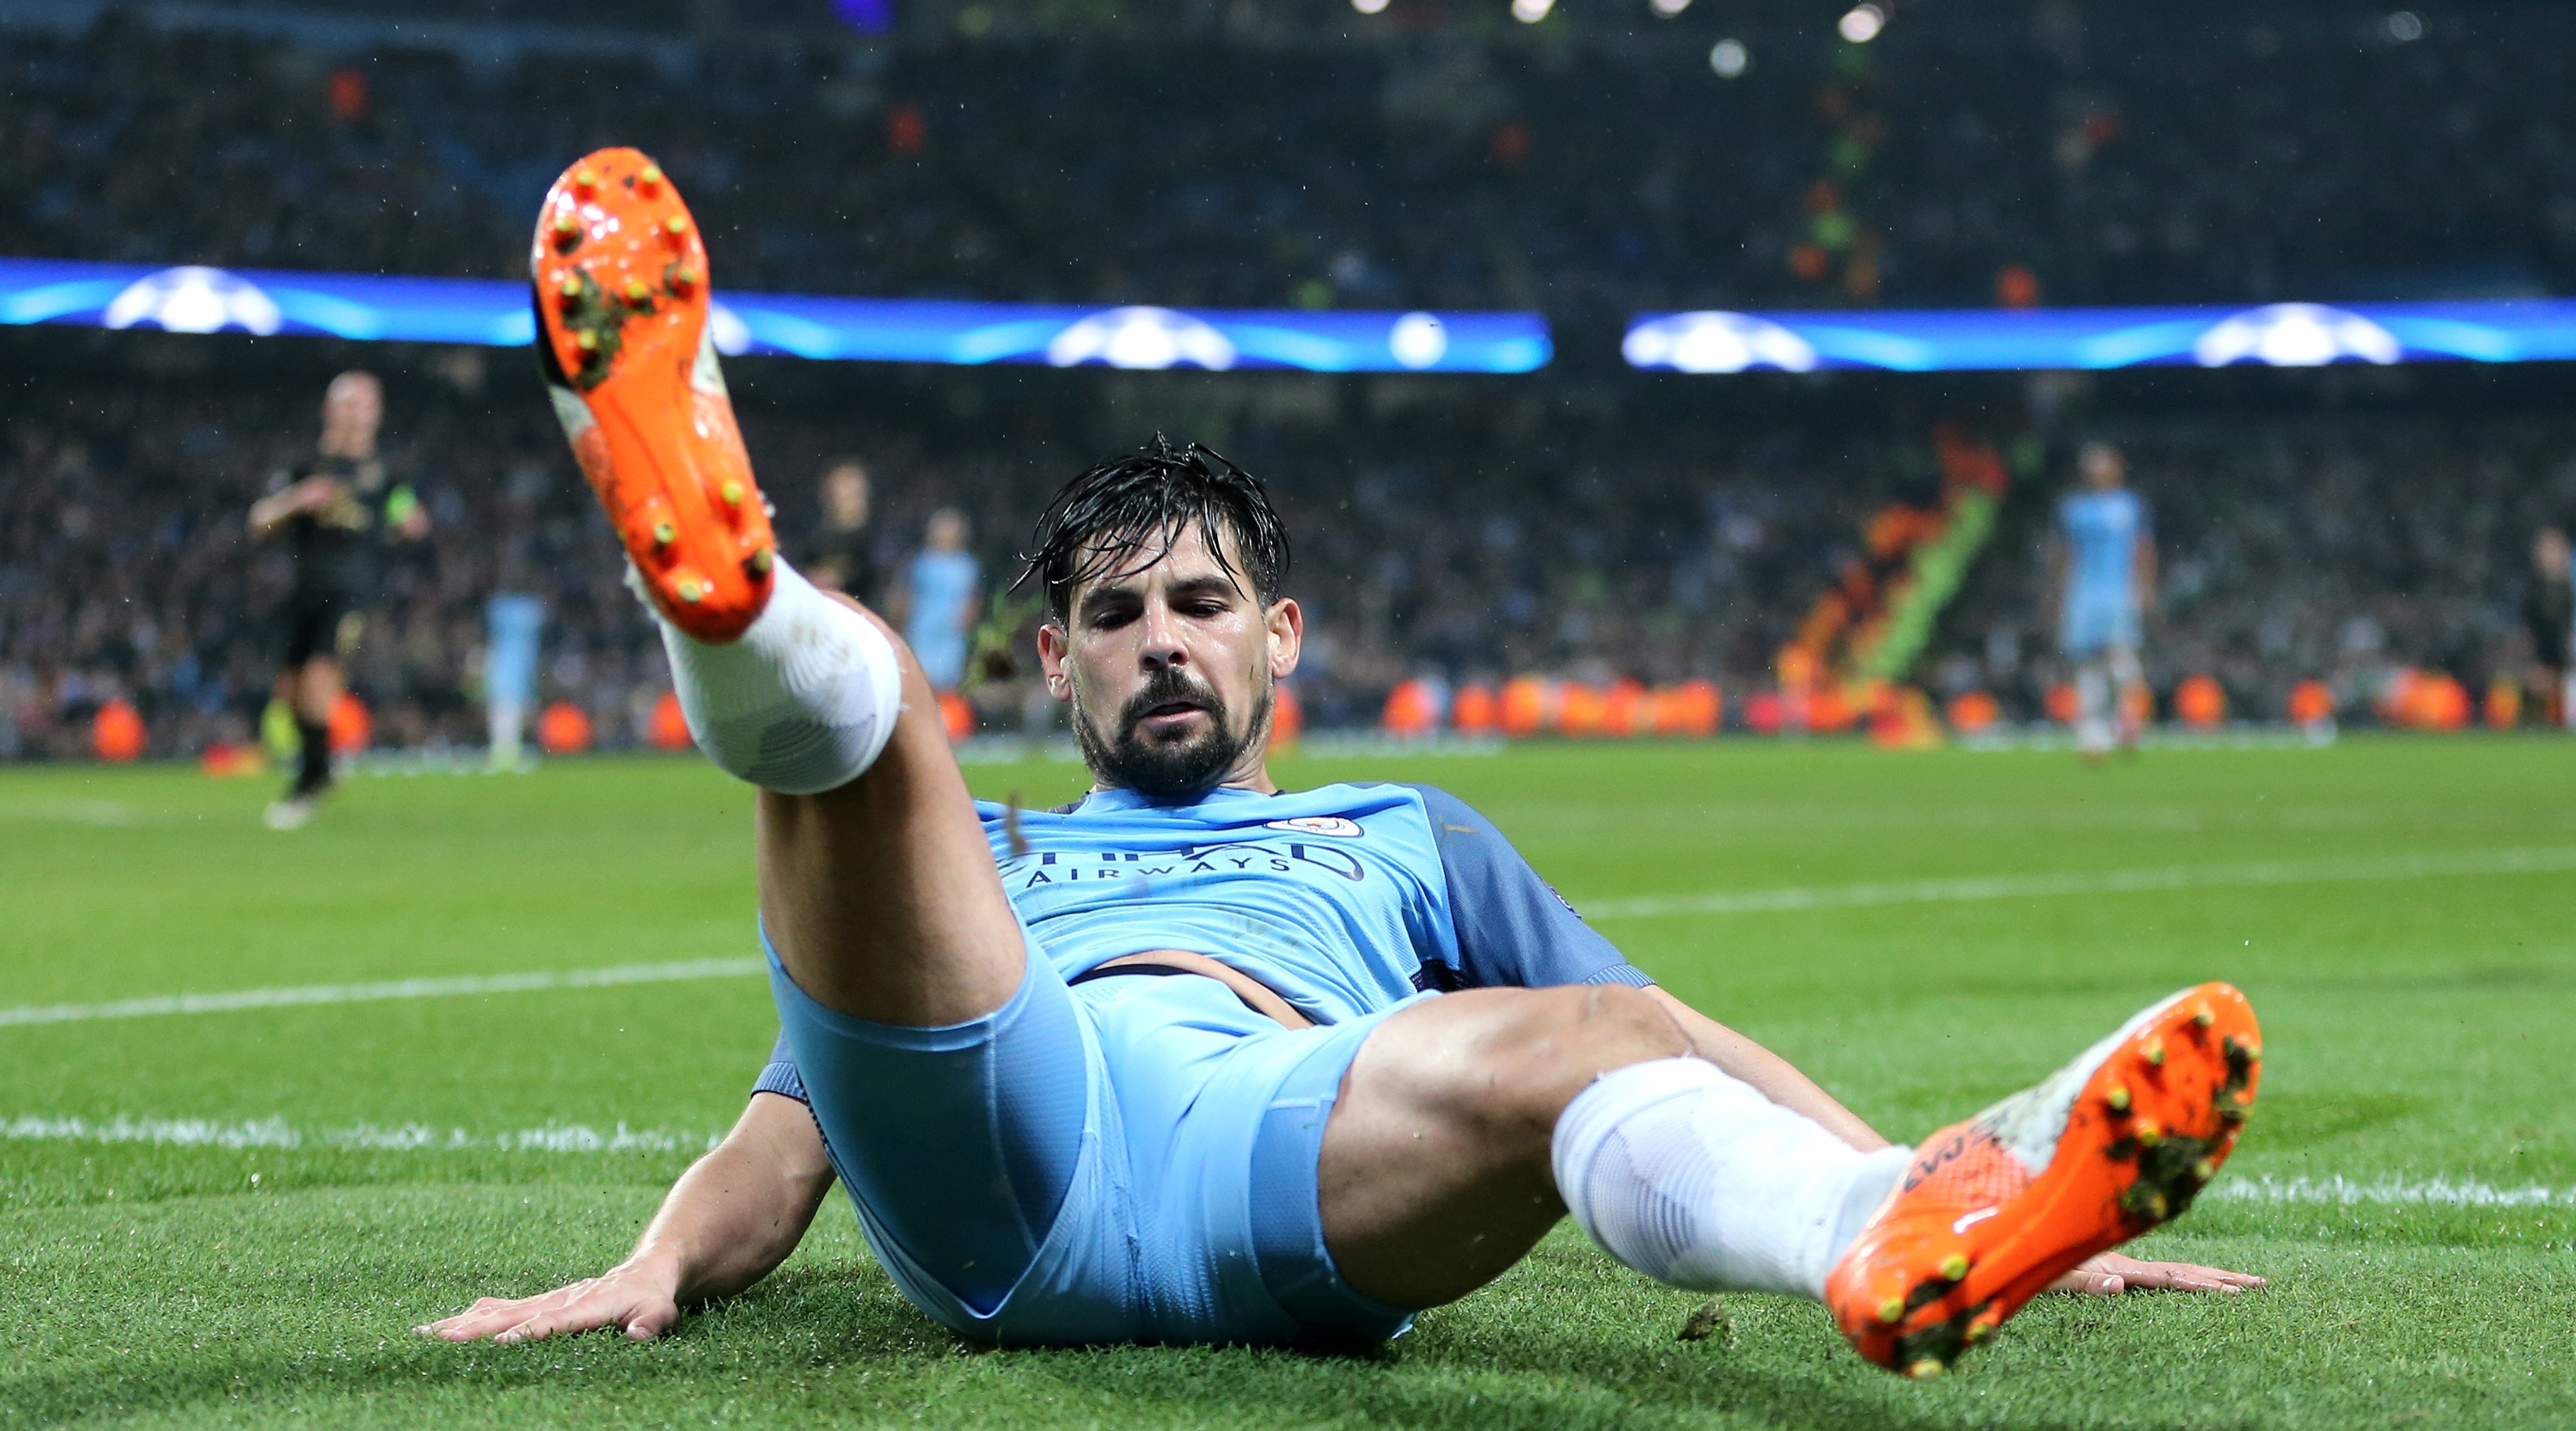 MANCHESTER, ENGLAND - DECEMBER 06: Nolito of Manchester City reacts during the UEFA Champions League match between Manchester City FC and Celtic FC at Etihad Stadium on December 6, 2016 in Manchester, England. (Photo by James Baylis - AMA/Getty Images)